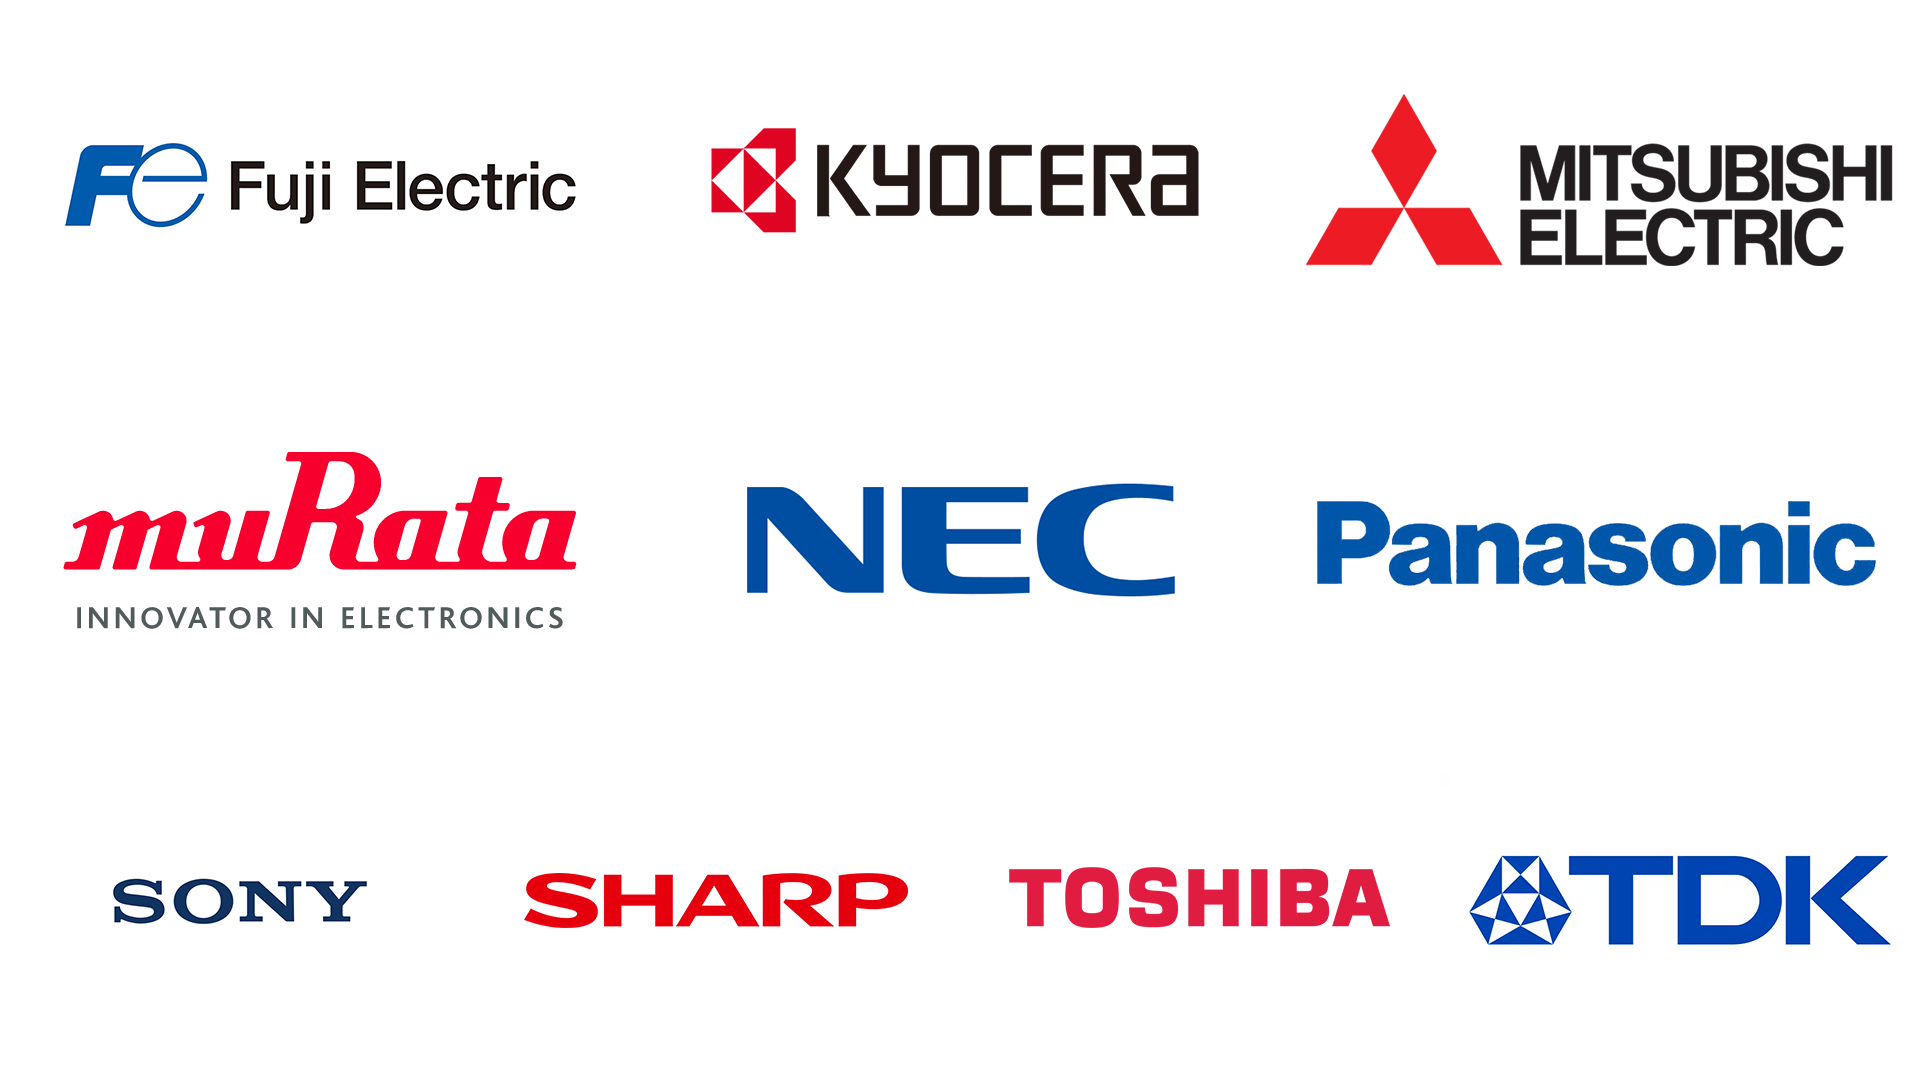 Top electronics manufacturers in Japan